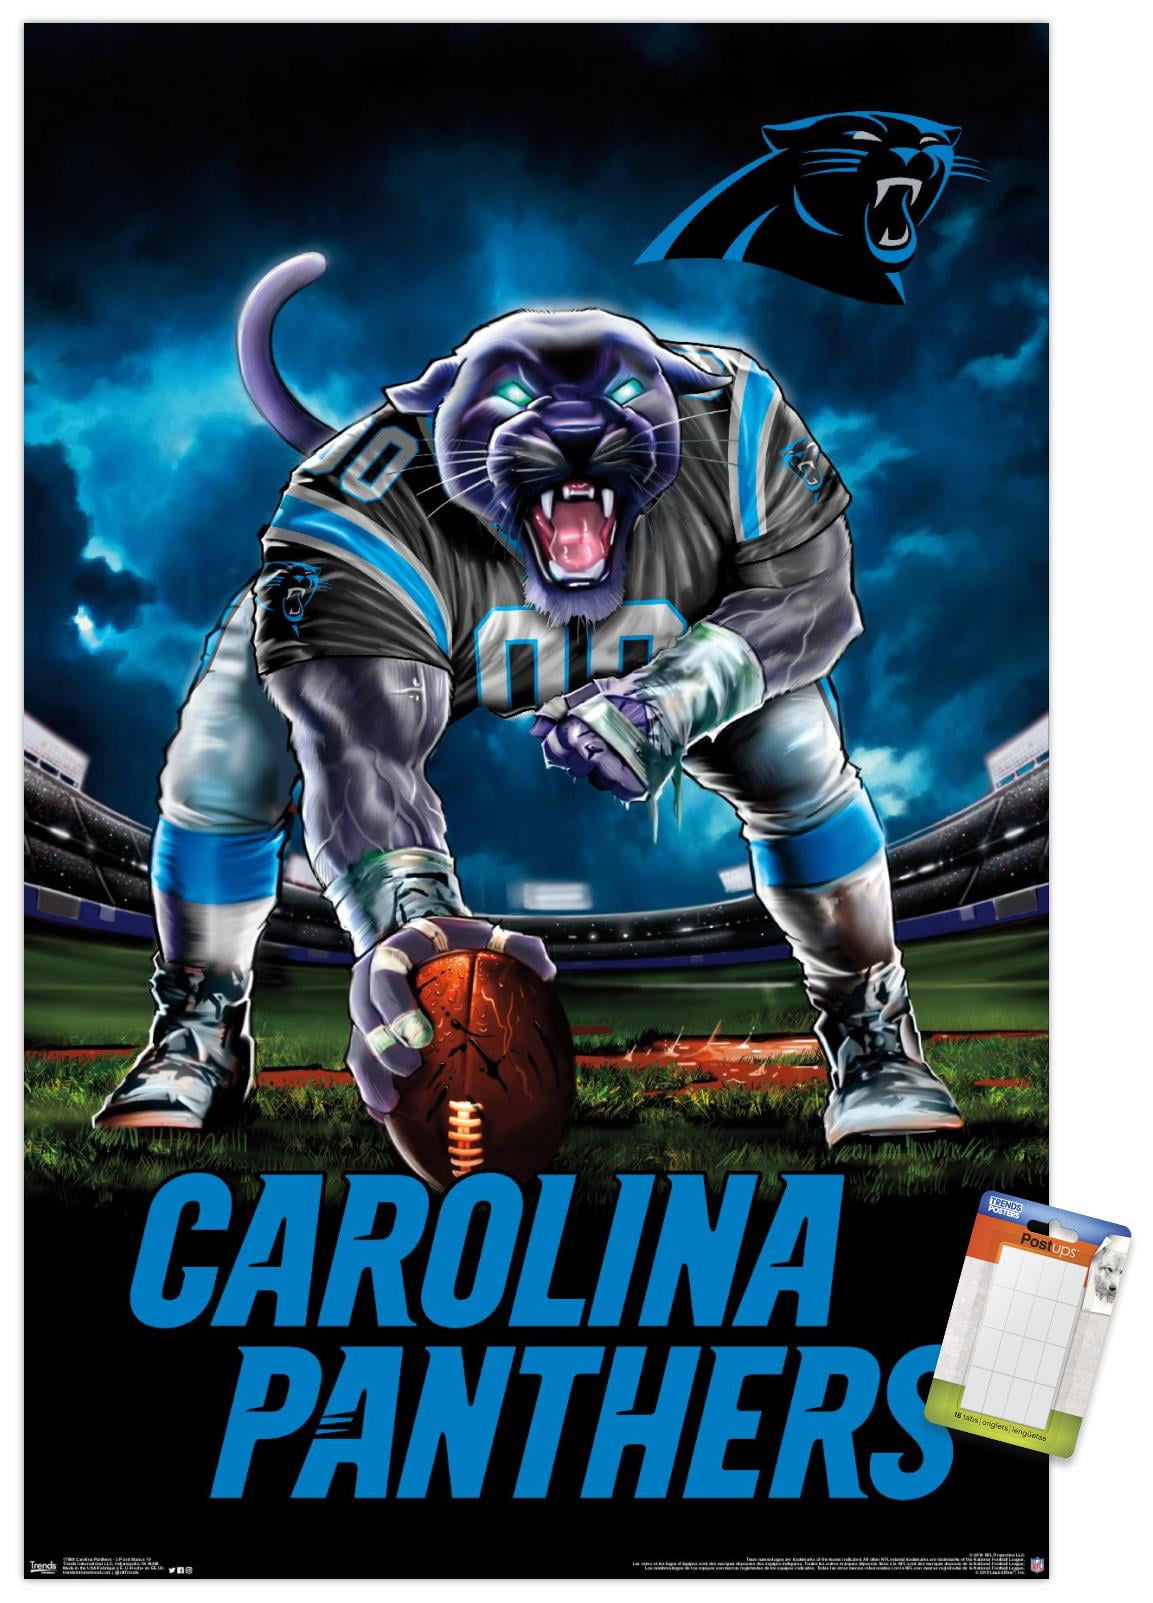 NFL Carolina Panthers - 3 Point Stance 19 Wall Poster, 22.375' x 34'